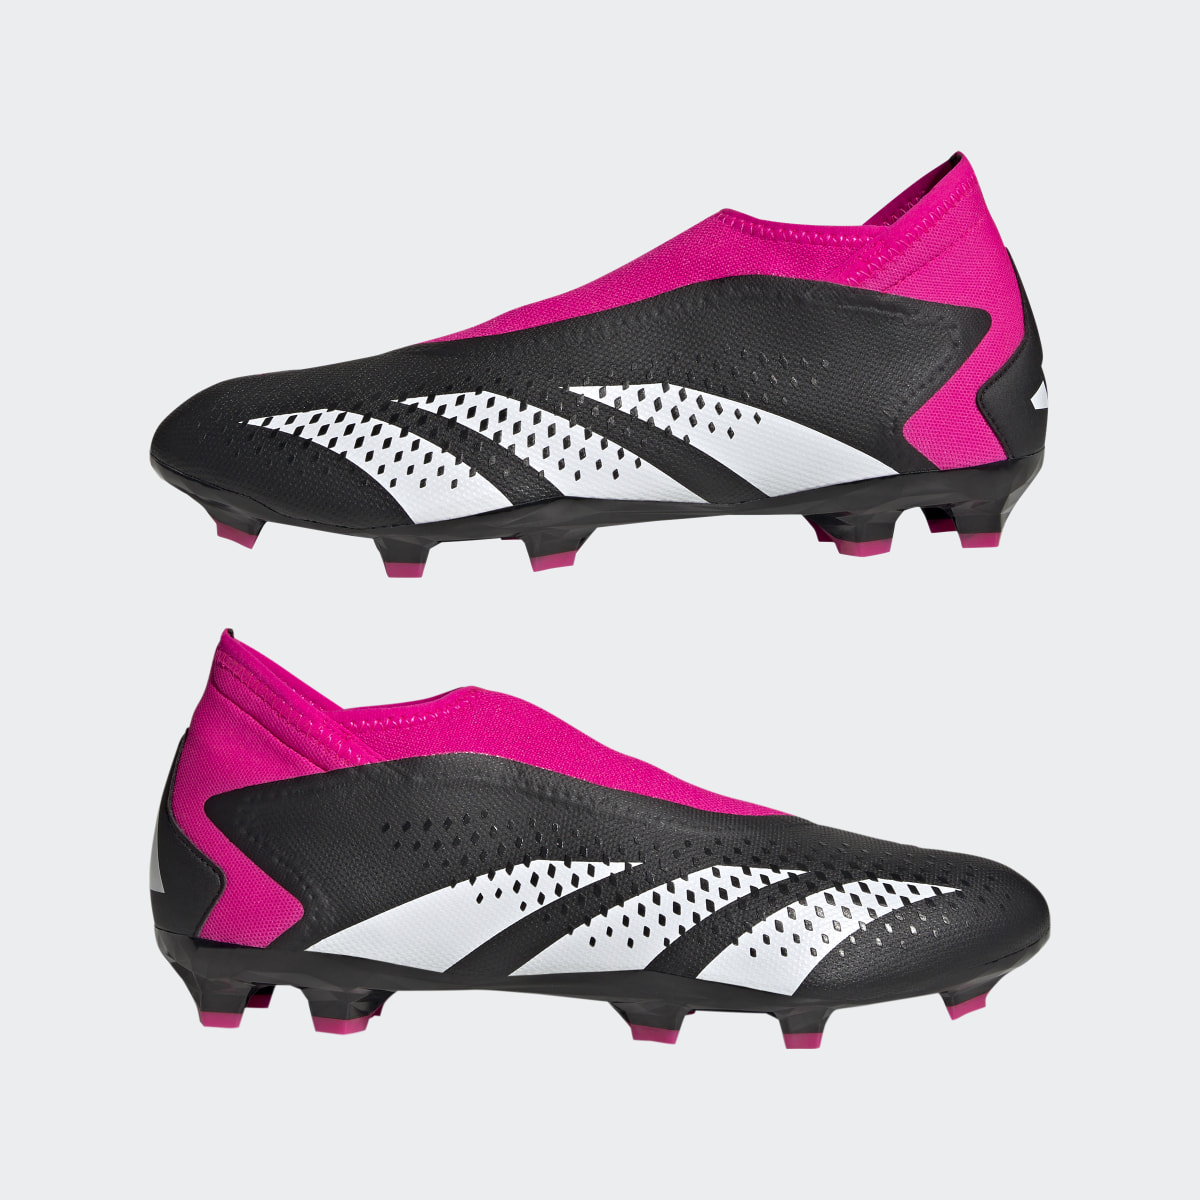 Adidas Predator Accuracy.3 Laceless Firm Ground Boots. 4